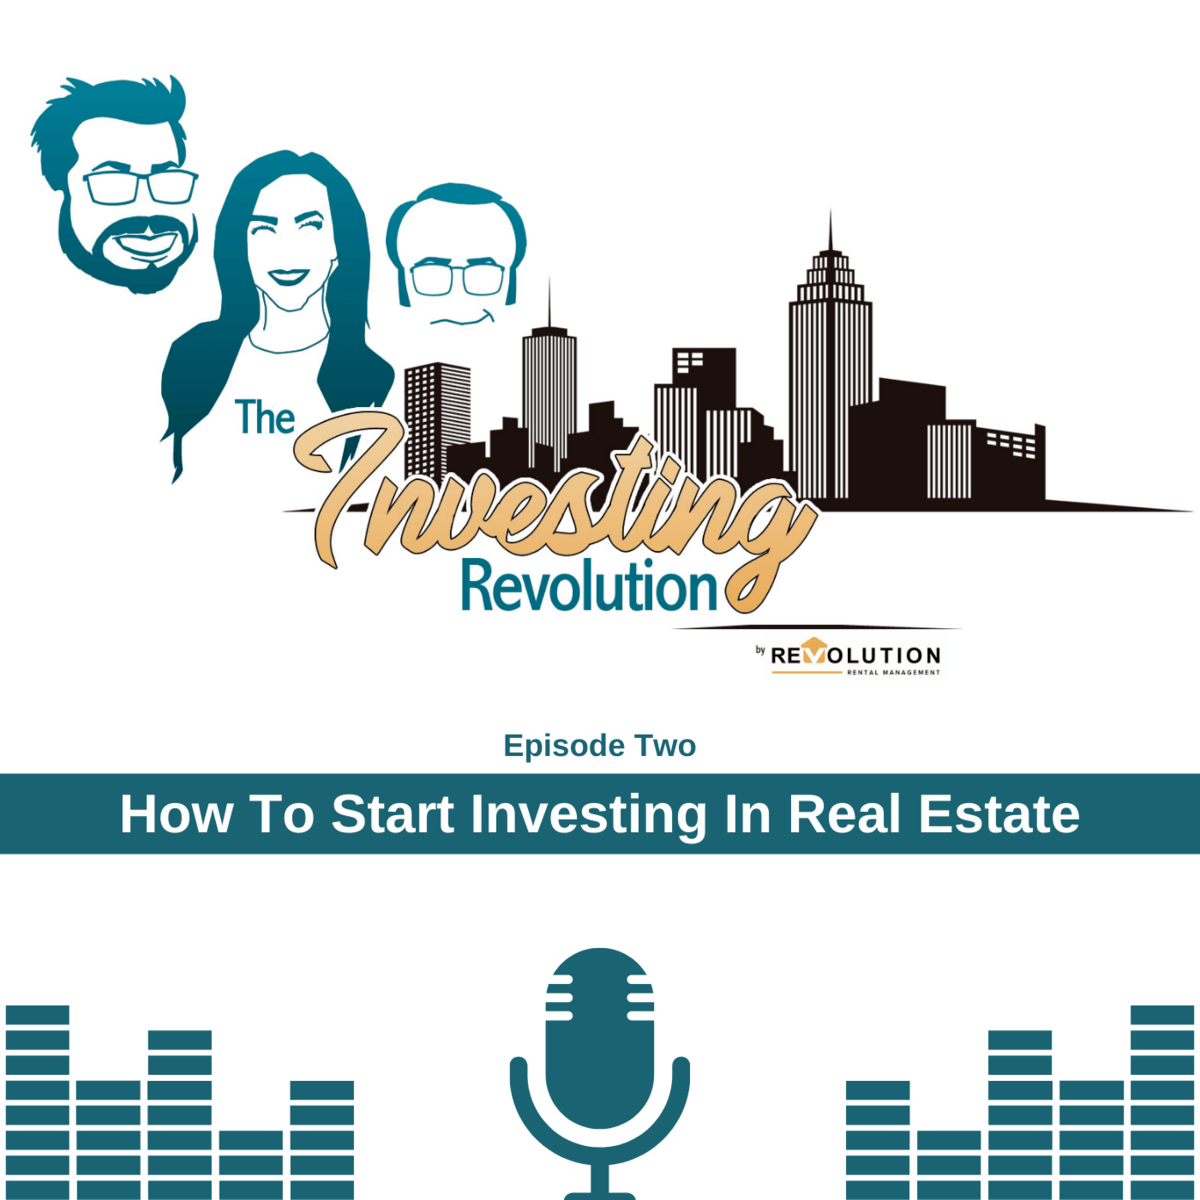 How To Start Investing In Real Estate